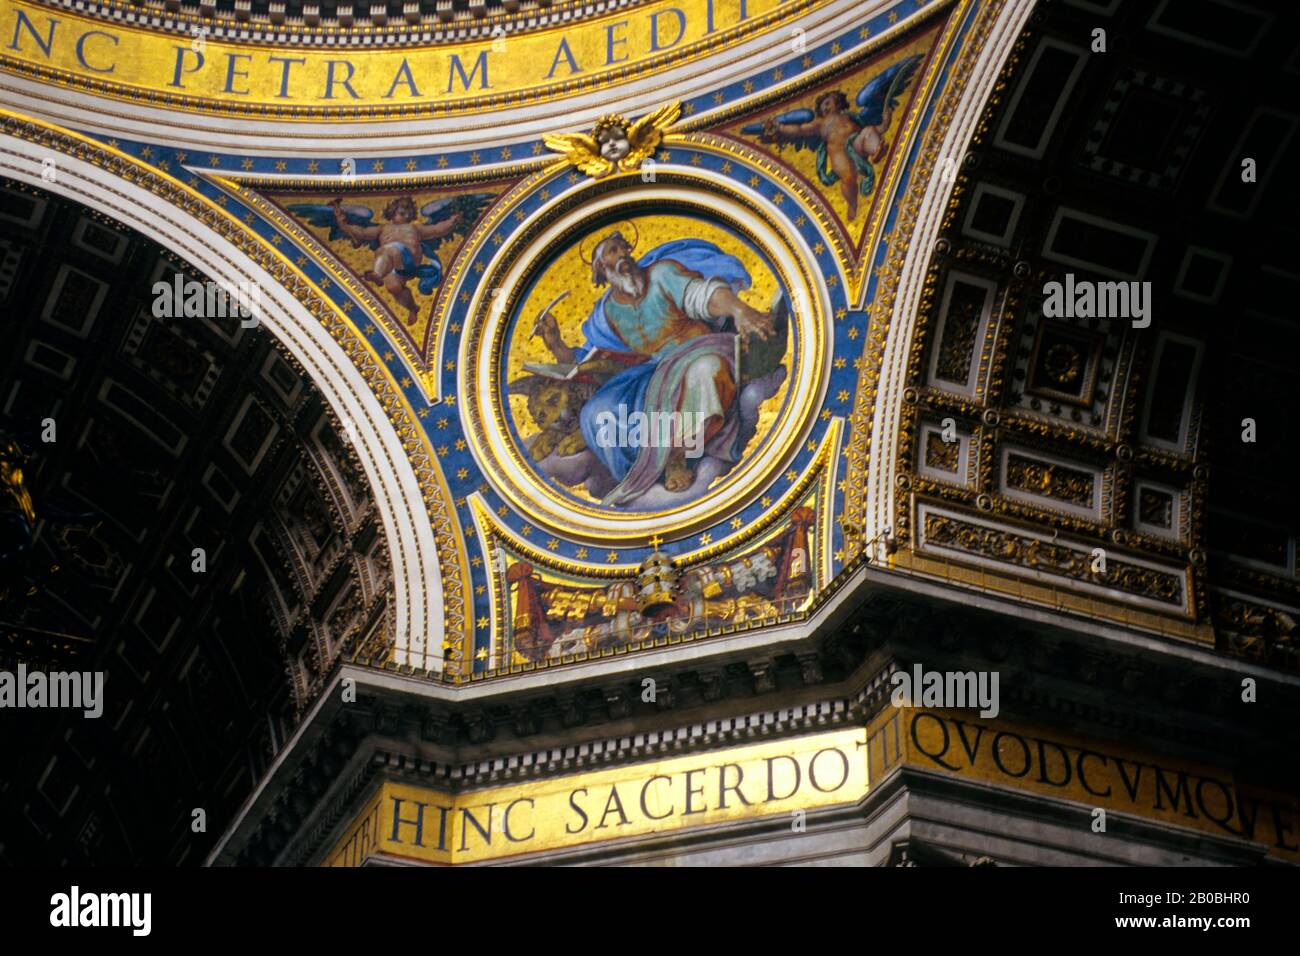 ITALY, ROME, VATICAN, ST. PETER'S SQUARE, ST. PETER'S BASILICA, INTERIOR, MICHELANGELO'S DOME, DETAIL Stock Photo